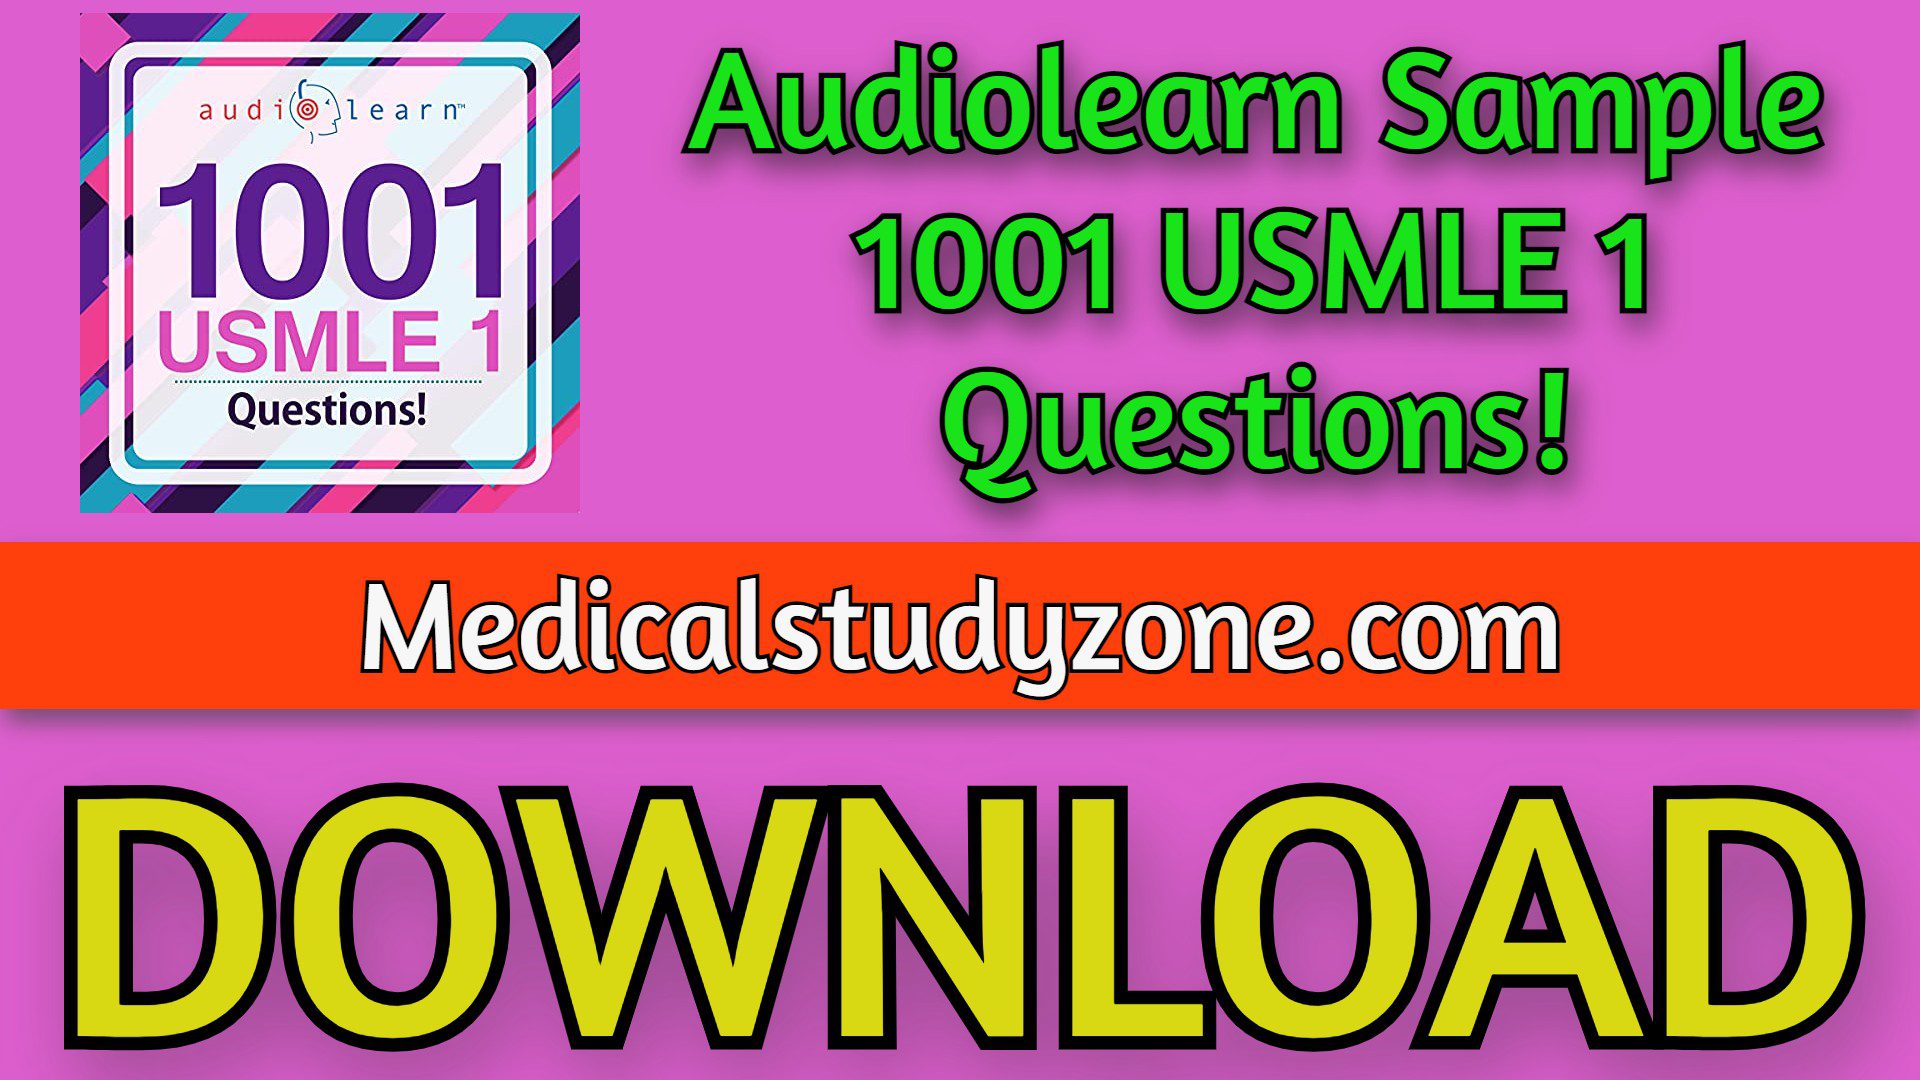 Audiolearn Sample 1001 USMLE 1 Questions! 2023 Free Download